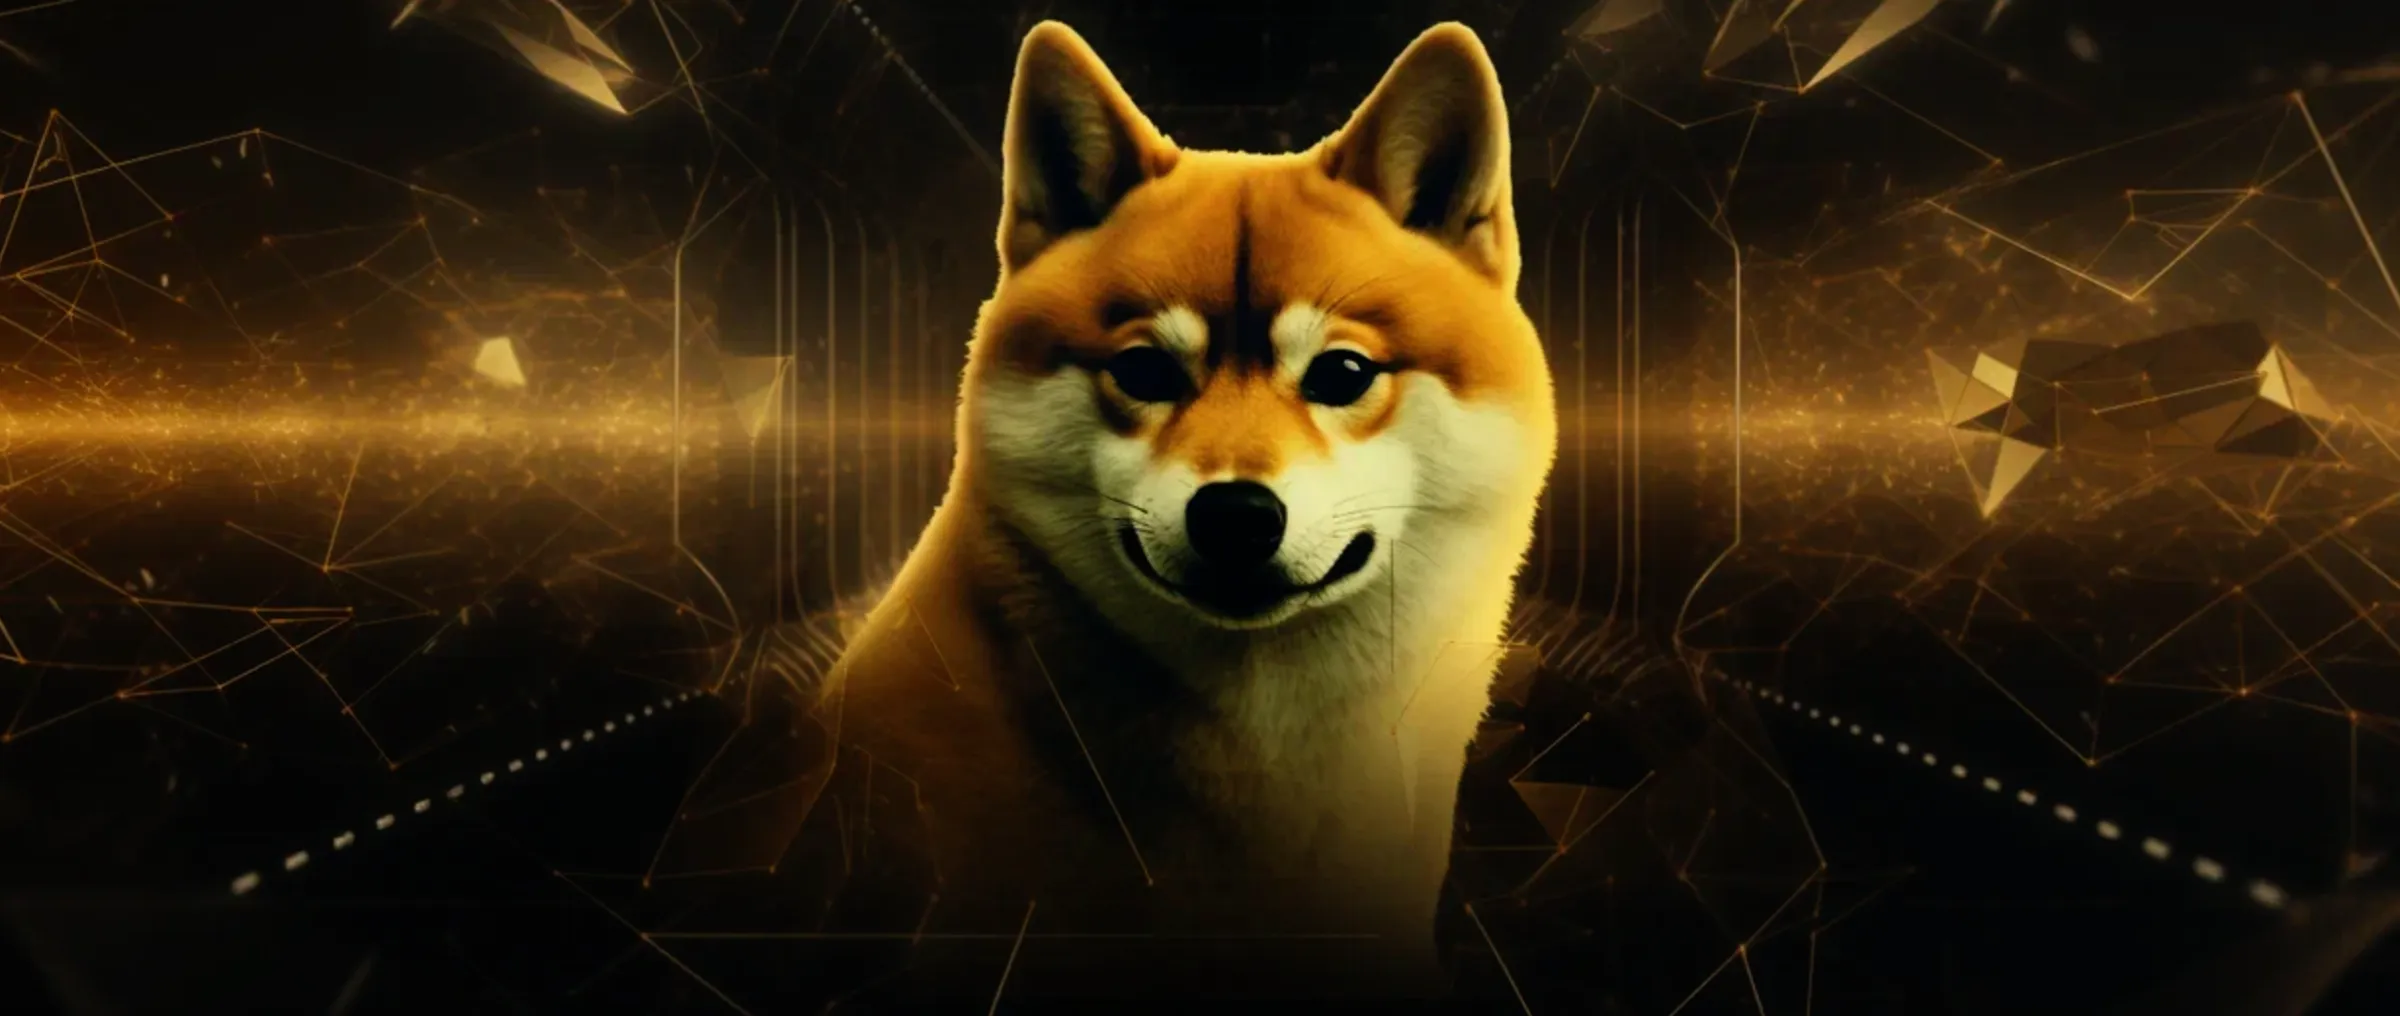 The number of large transactions with Shiba Inu (SHIB) increased by 220%